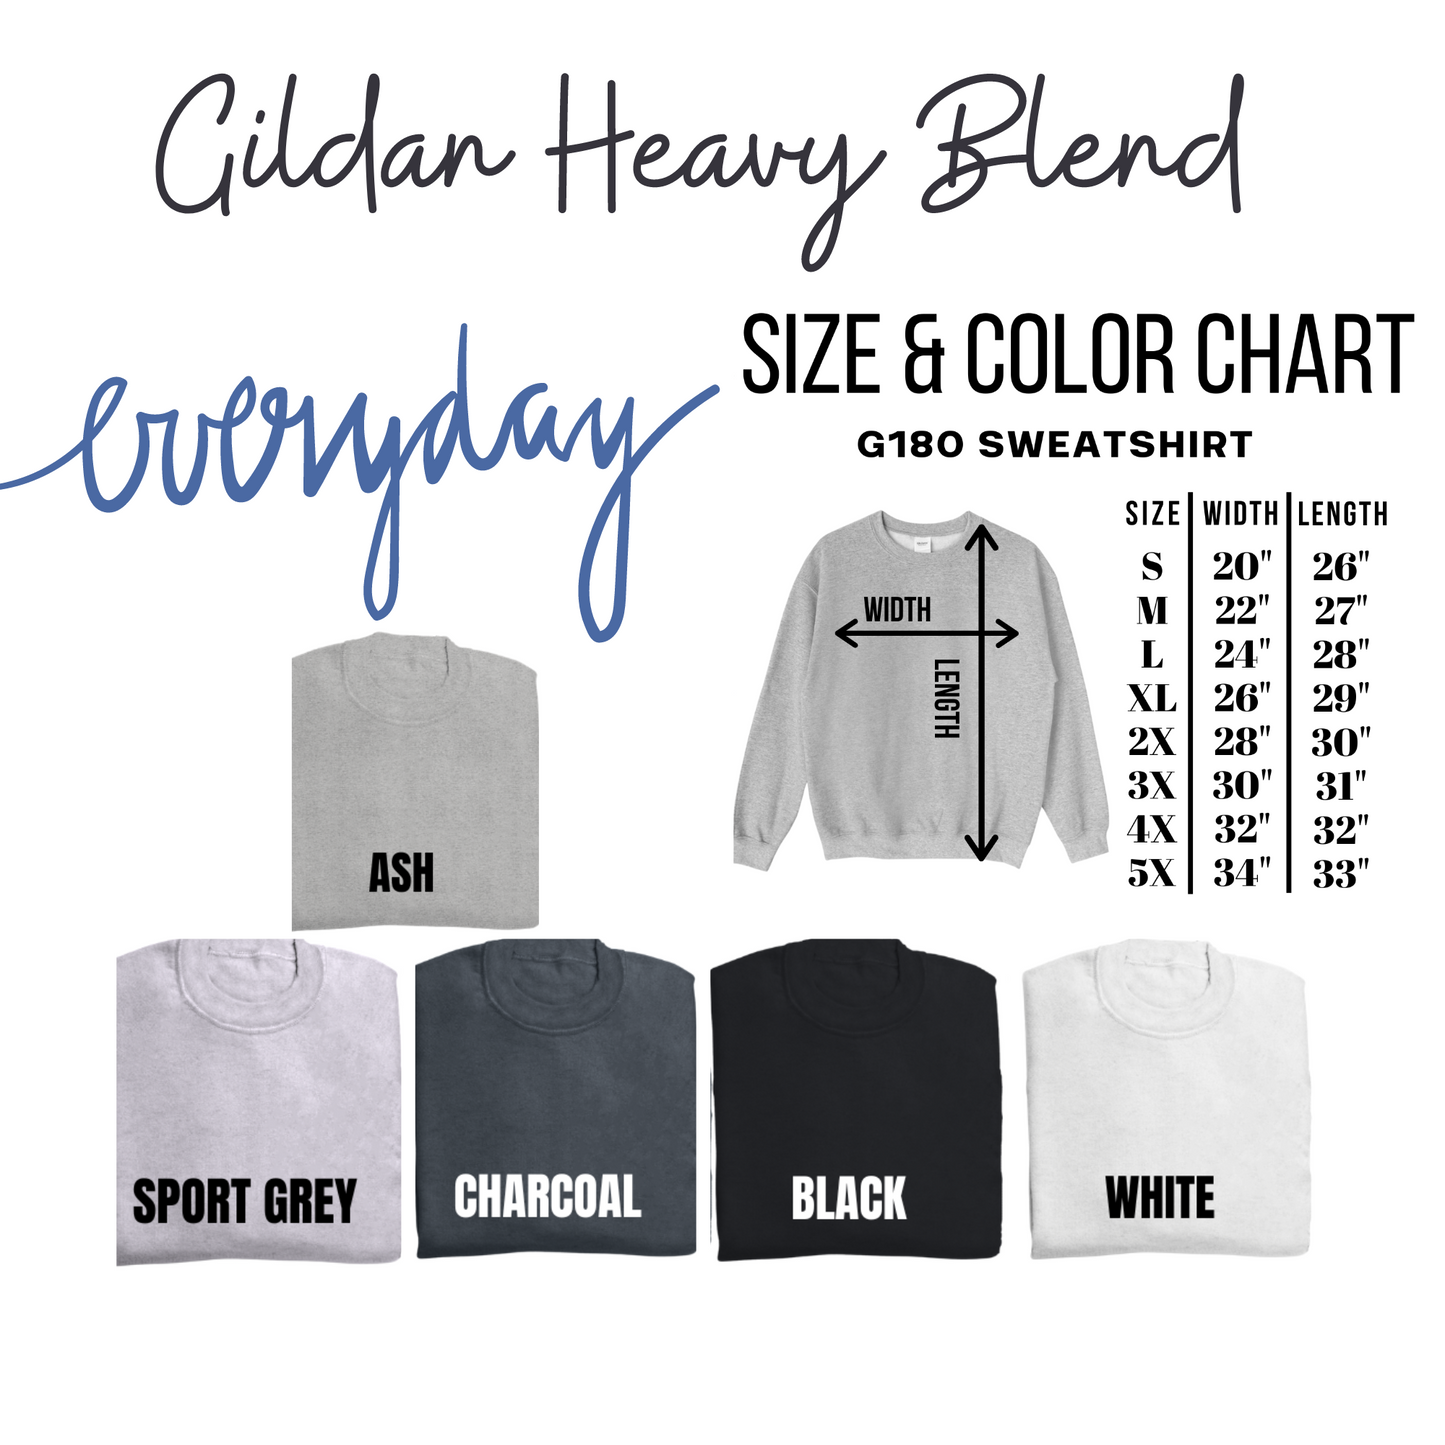 Merry Blessed and Christmas Obsessed Gildan Heavy Blend Sweatshirt